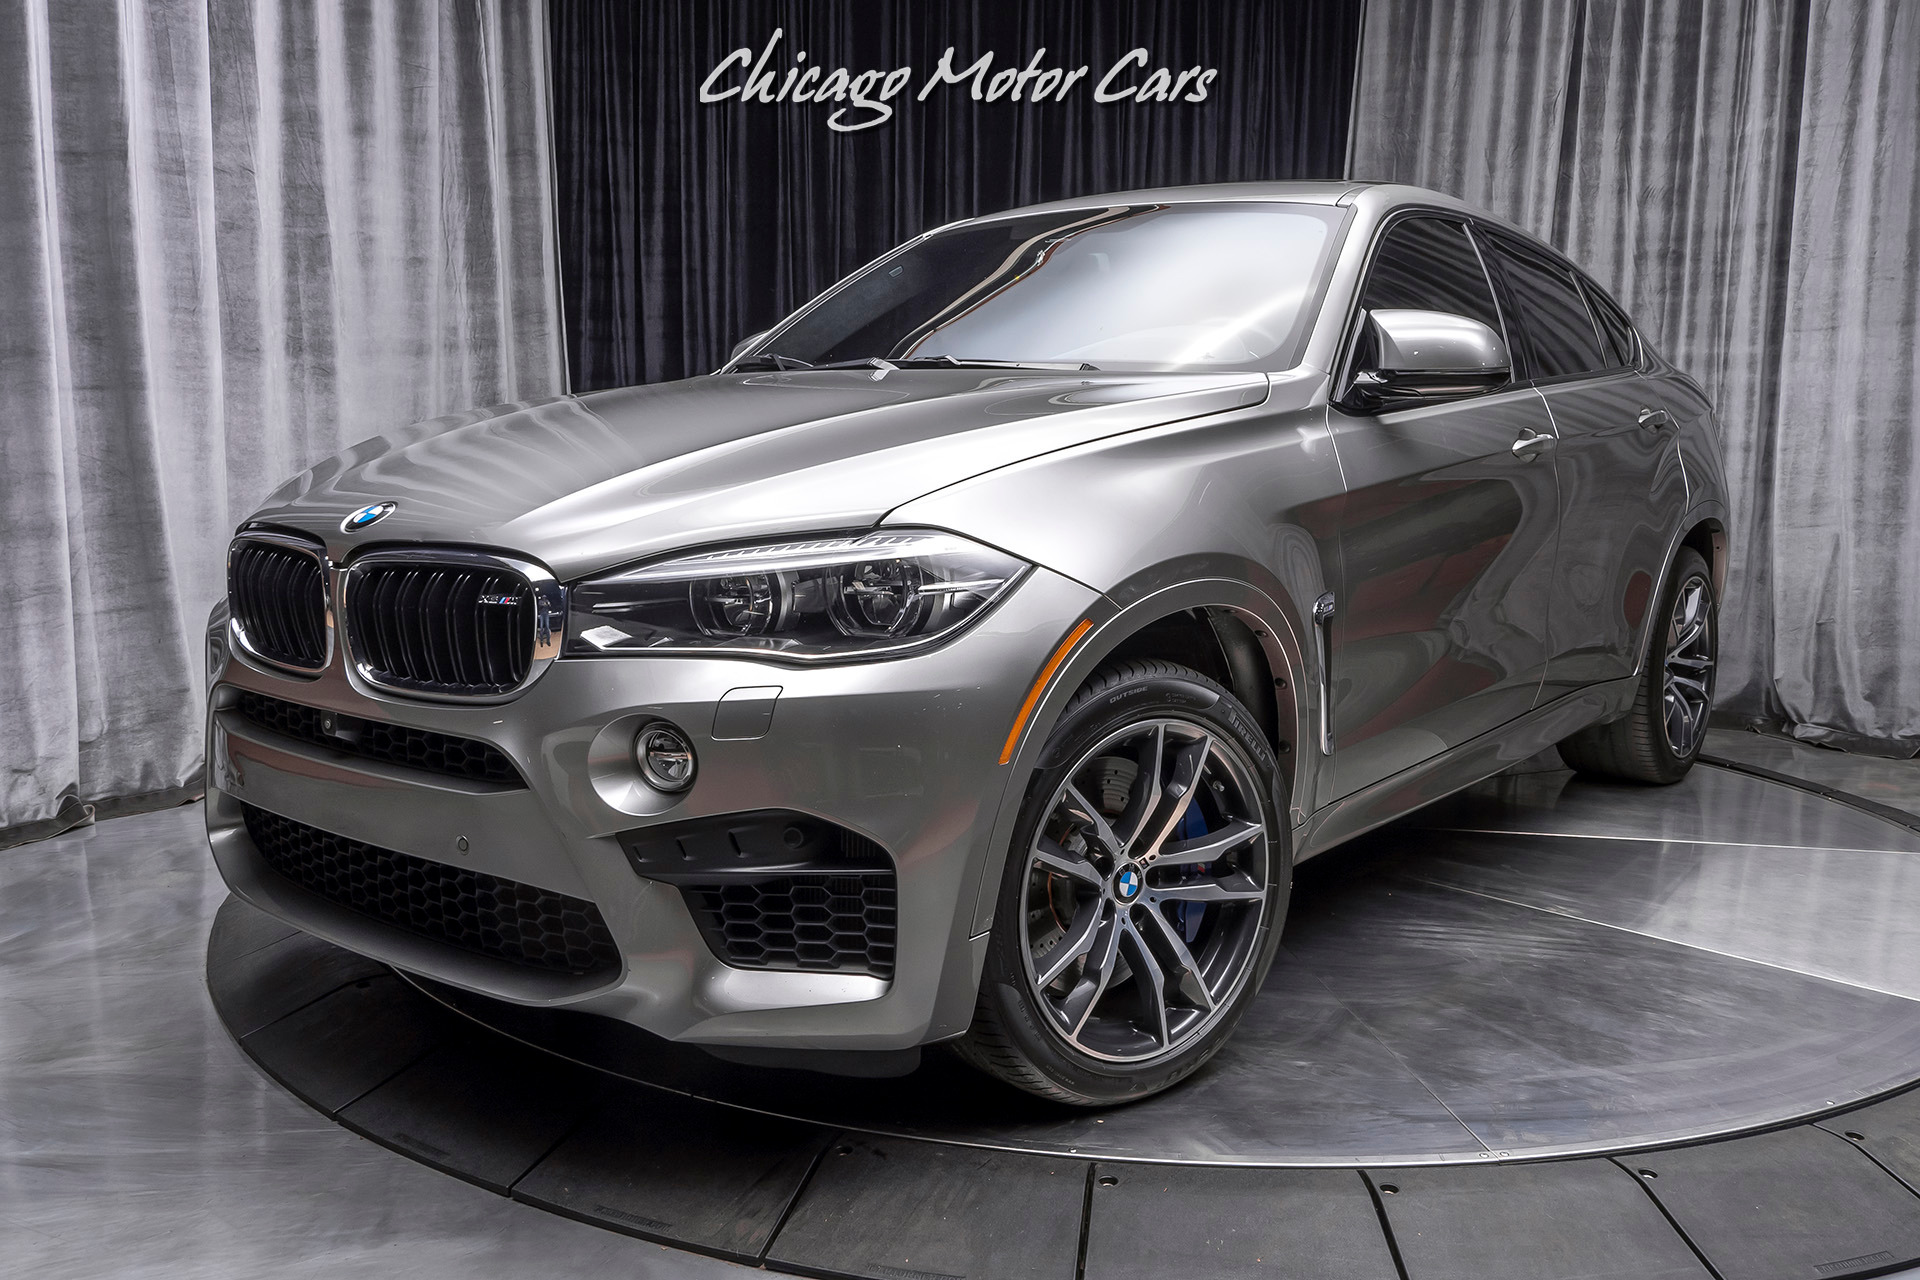 Used 2017 BMW X6 M AWD SUV MSRP $112K+ EXECUTIVE PACKAGE! For Sale (Special  Pricing) | Chicago Motor Cars Stock #16489